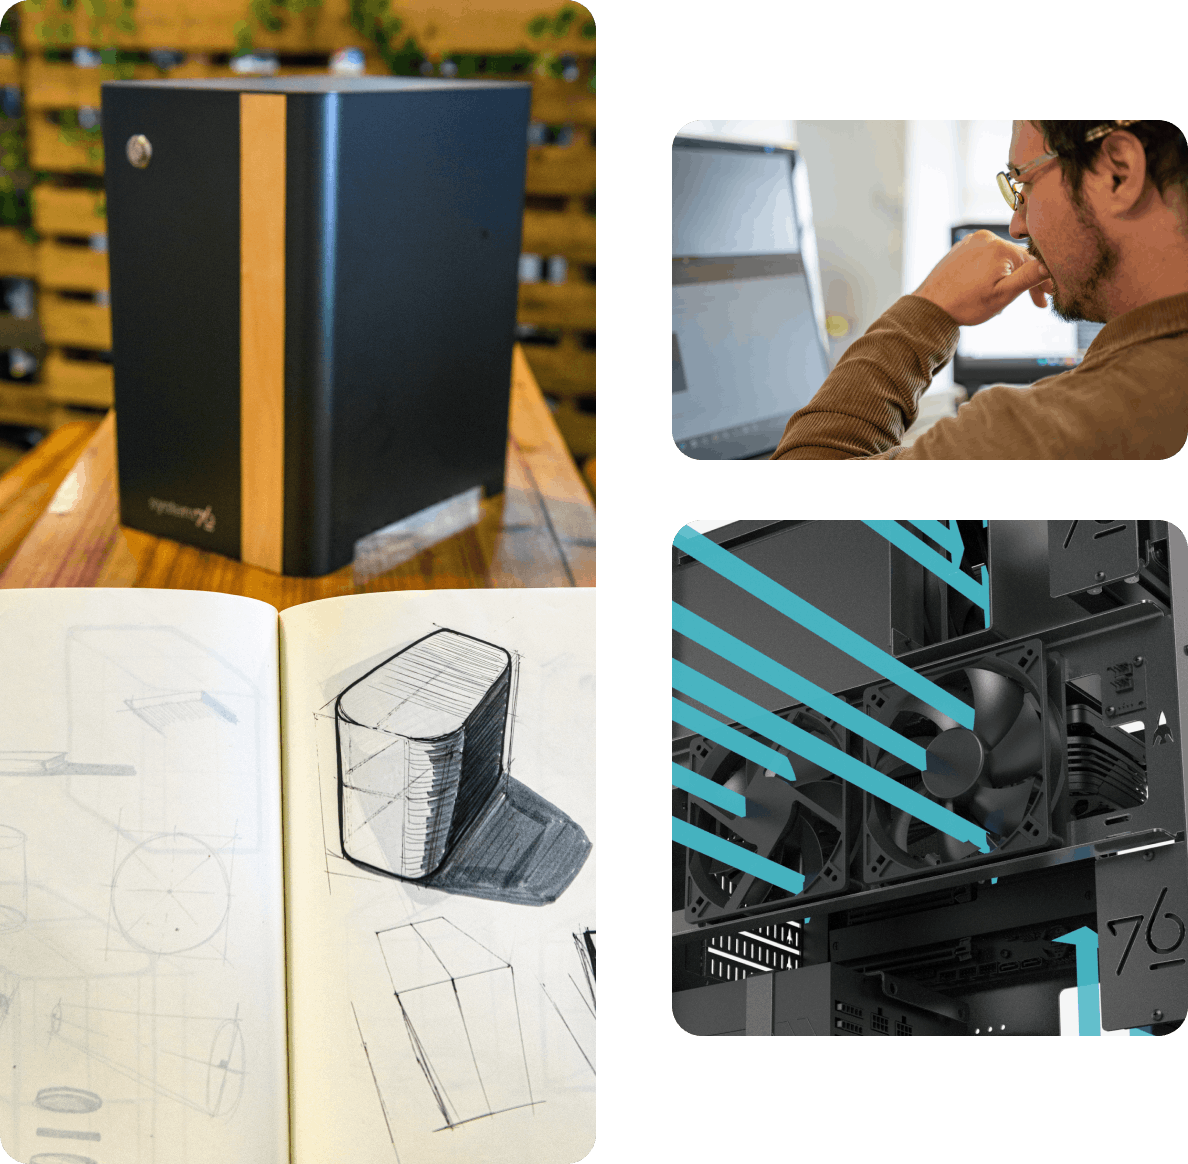 Three images create a collage. One image features a thelio with birch accent next to the initial drawing of the thelio product. Second image is of a man looking at a computer pensively. Third image is a still of an animation illustrating airflow with blue arrows representing air intake points.